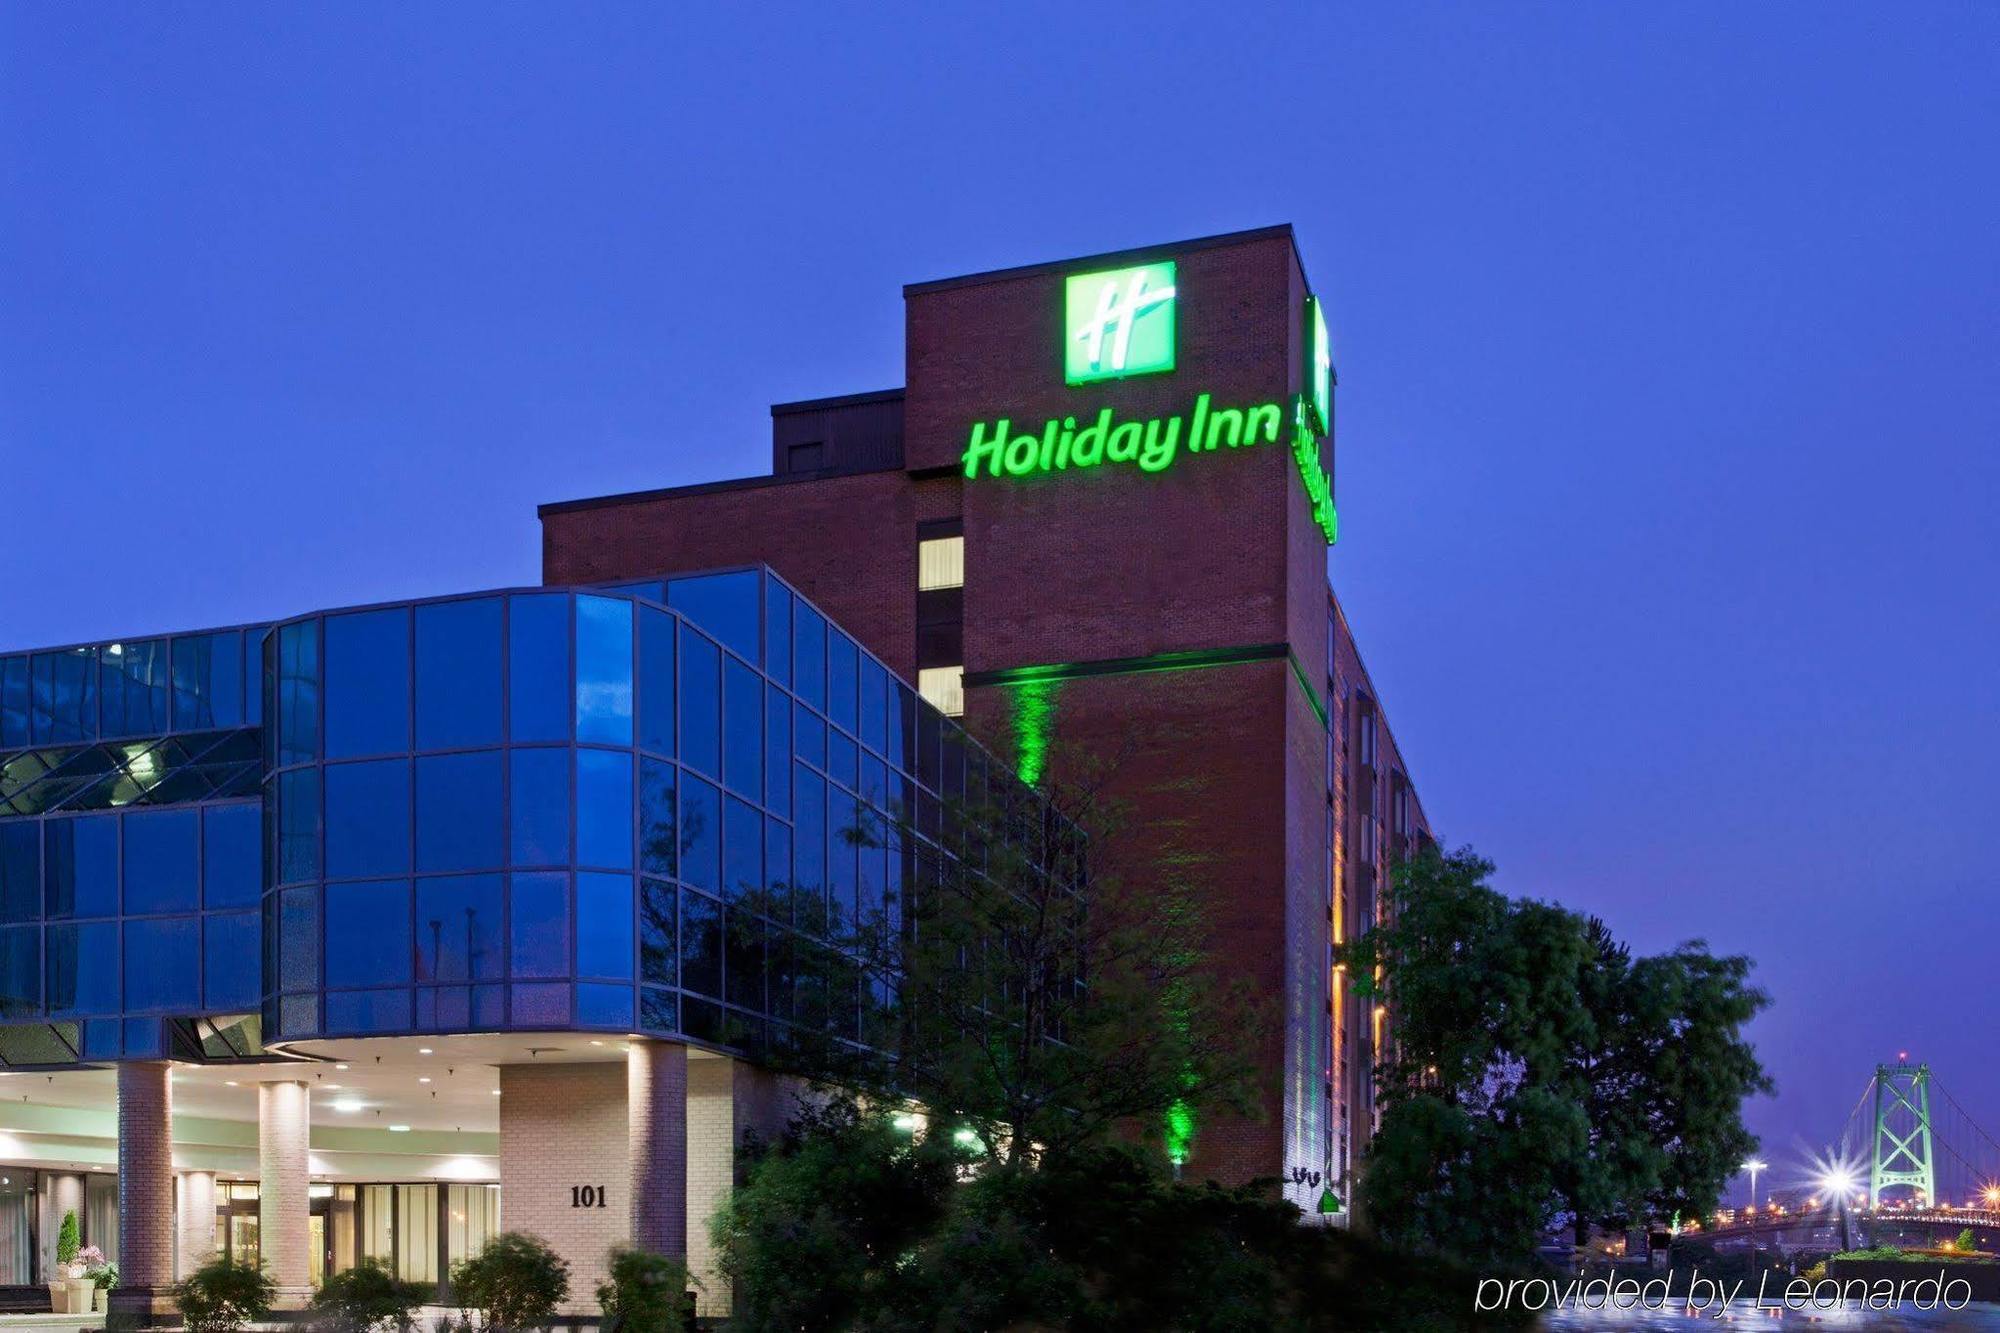 Doubletree By Hilton Halifax Dartmouth Hotel Exterior foto